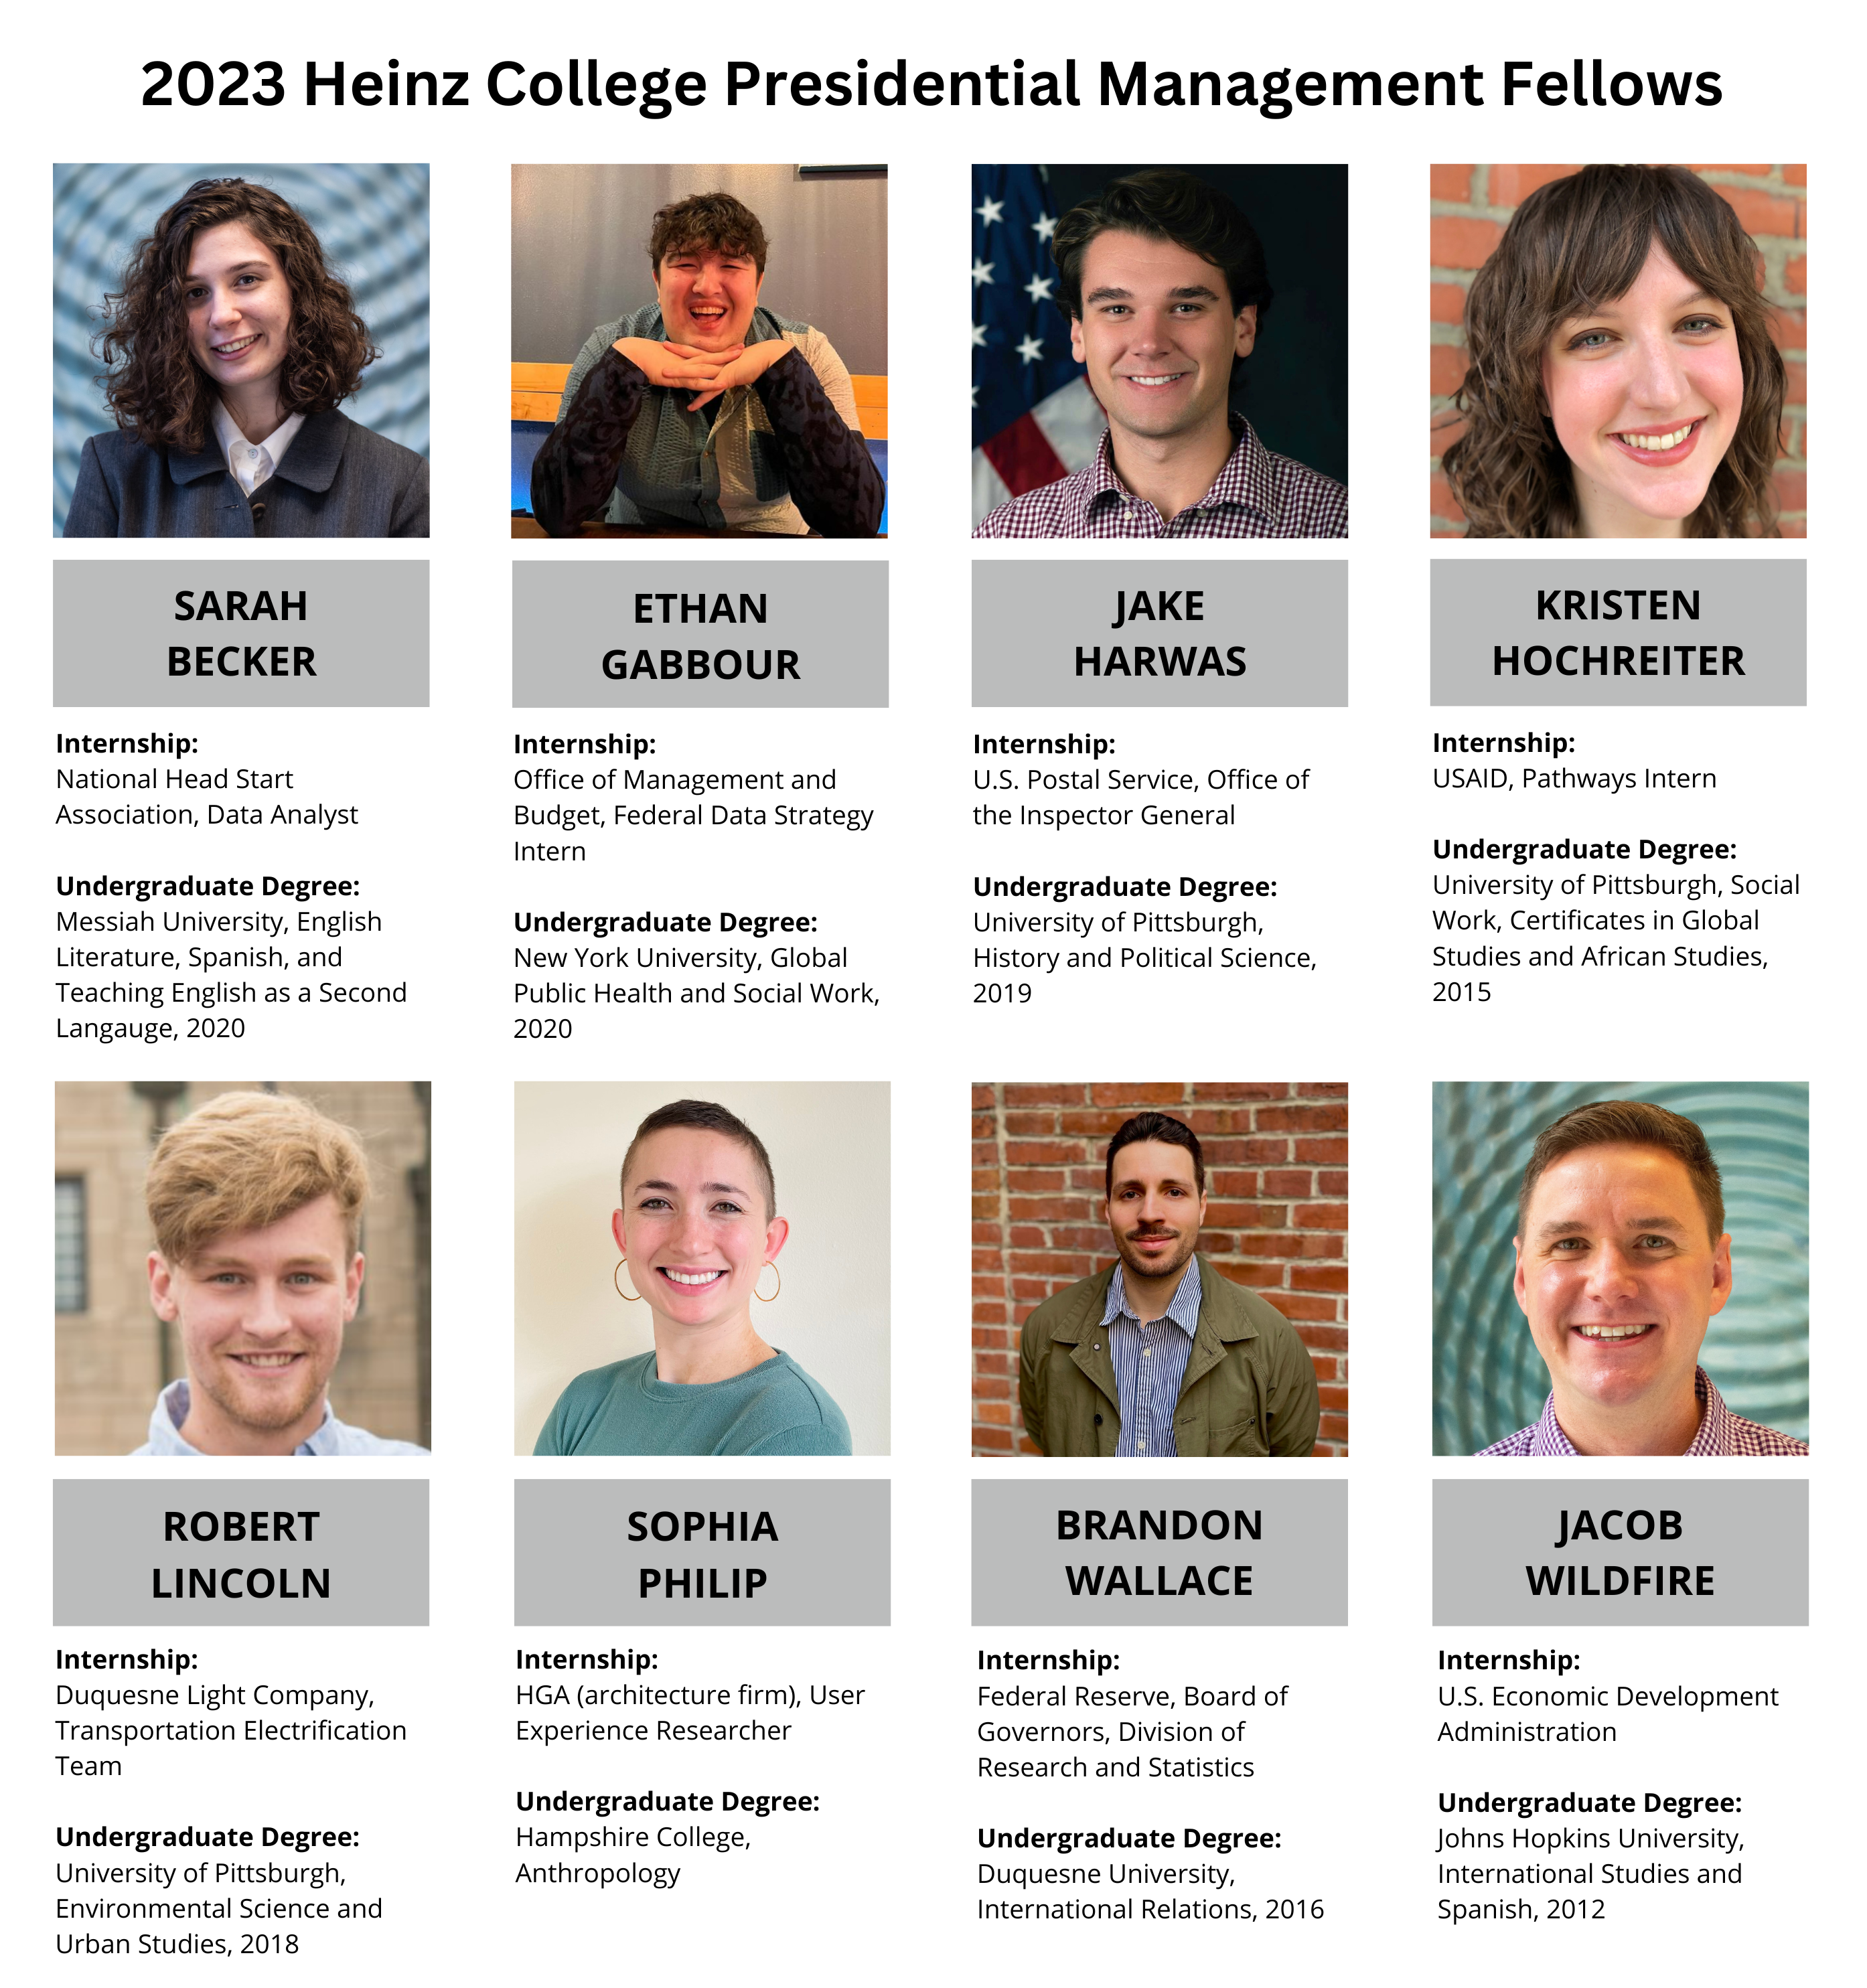 Presidential Management Fellows 2023 and internships